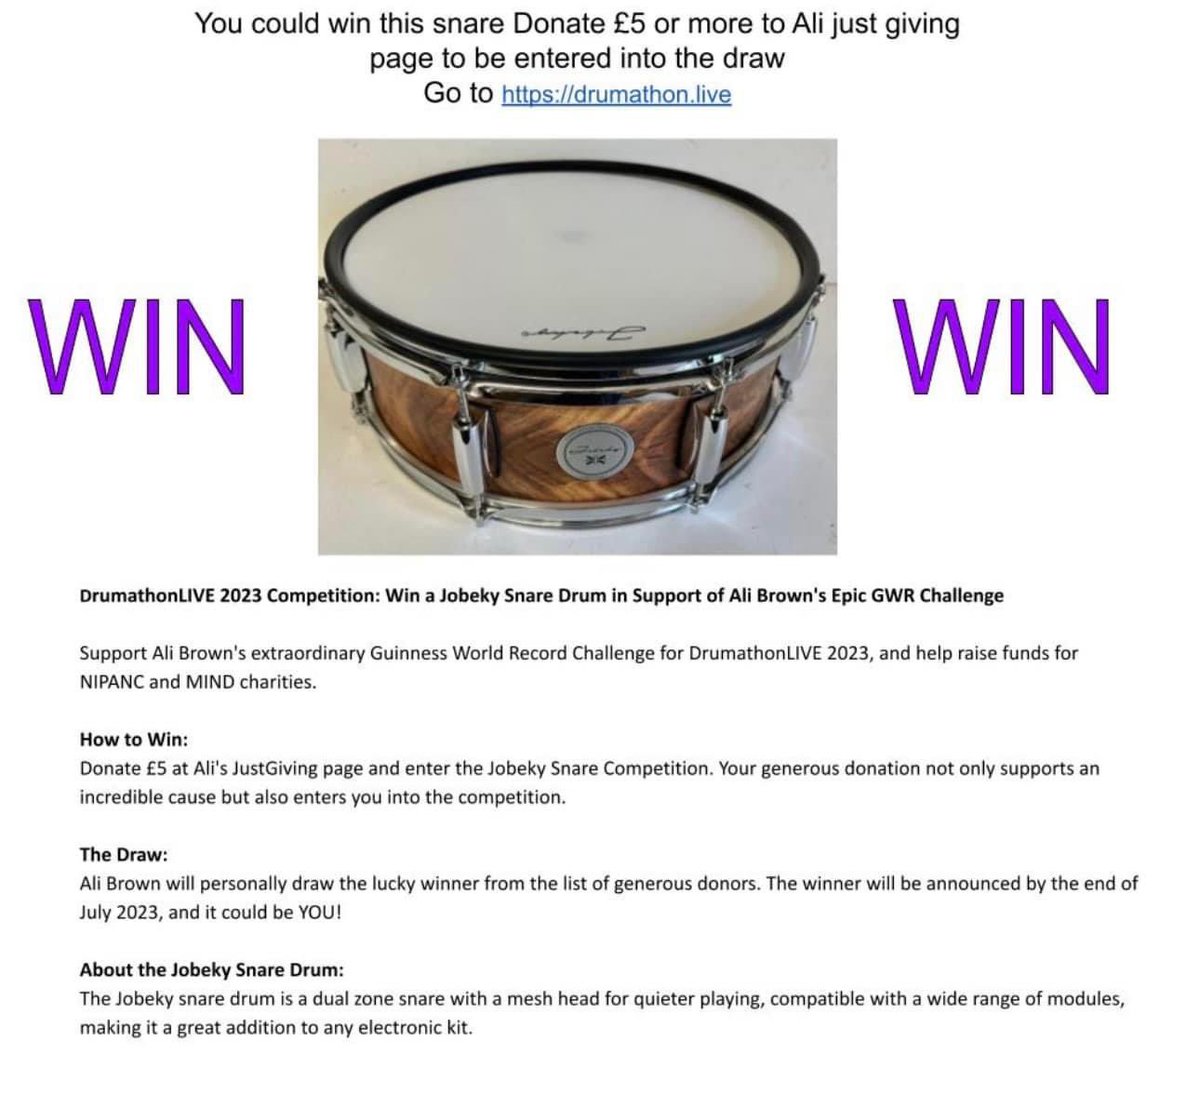 our amazin drum endorsers have this snare up for grabs for anyone able to support this mint cause, read the full post for info. 

Also 150+ hours in a row of drumming? What a champ

 @jobekydrums